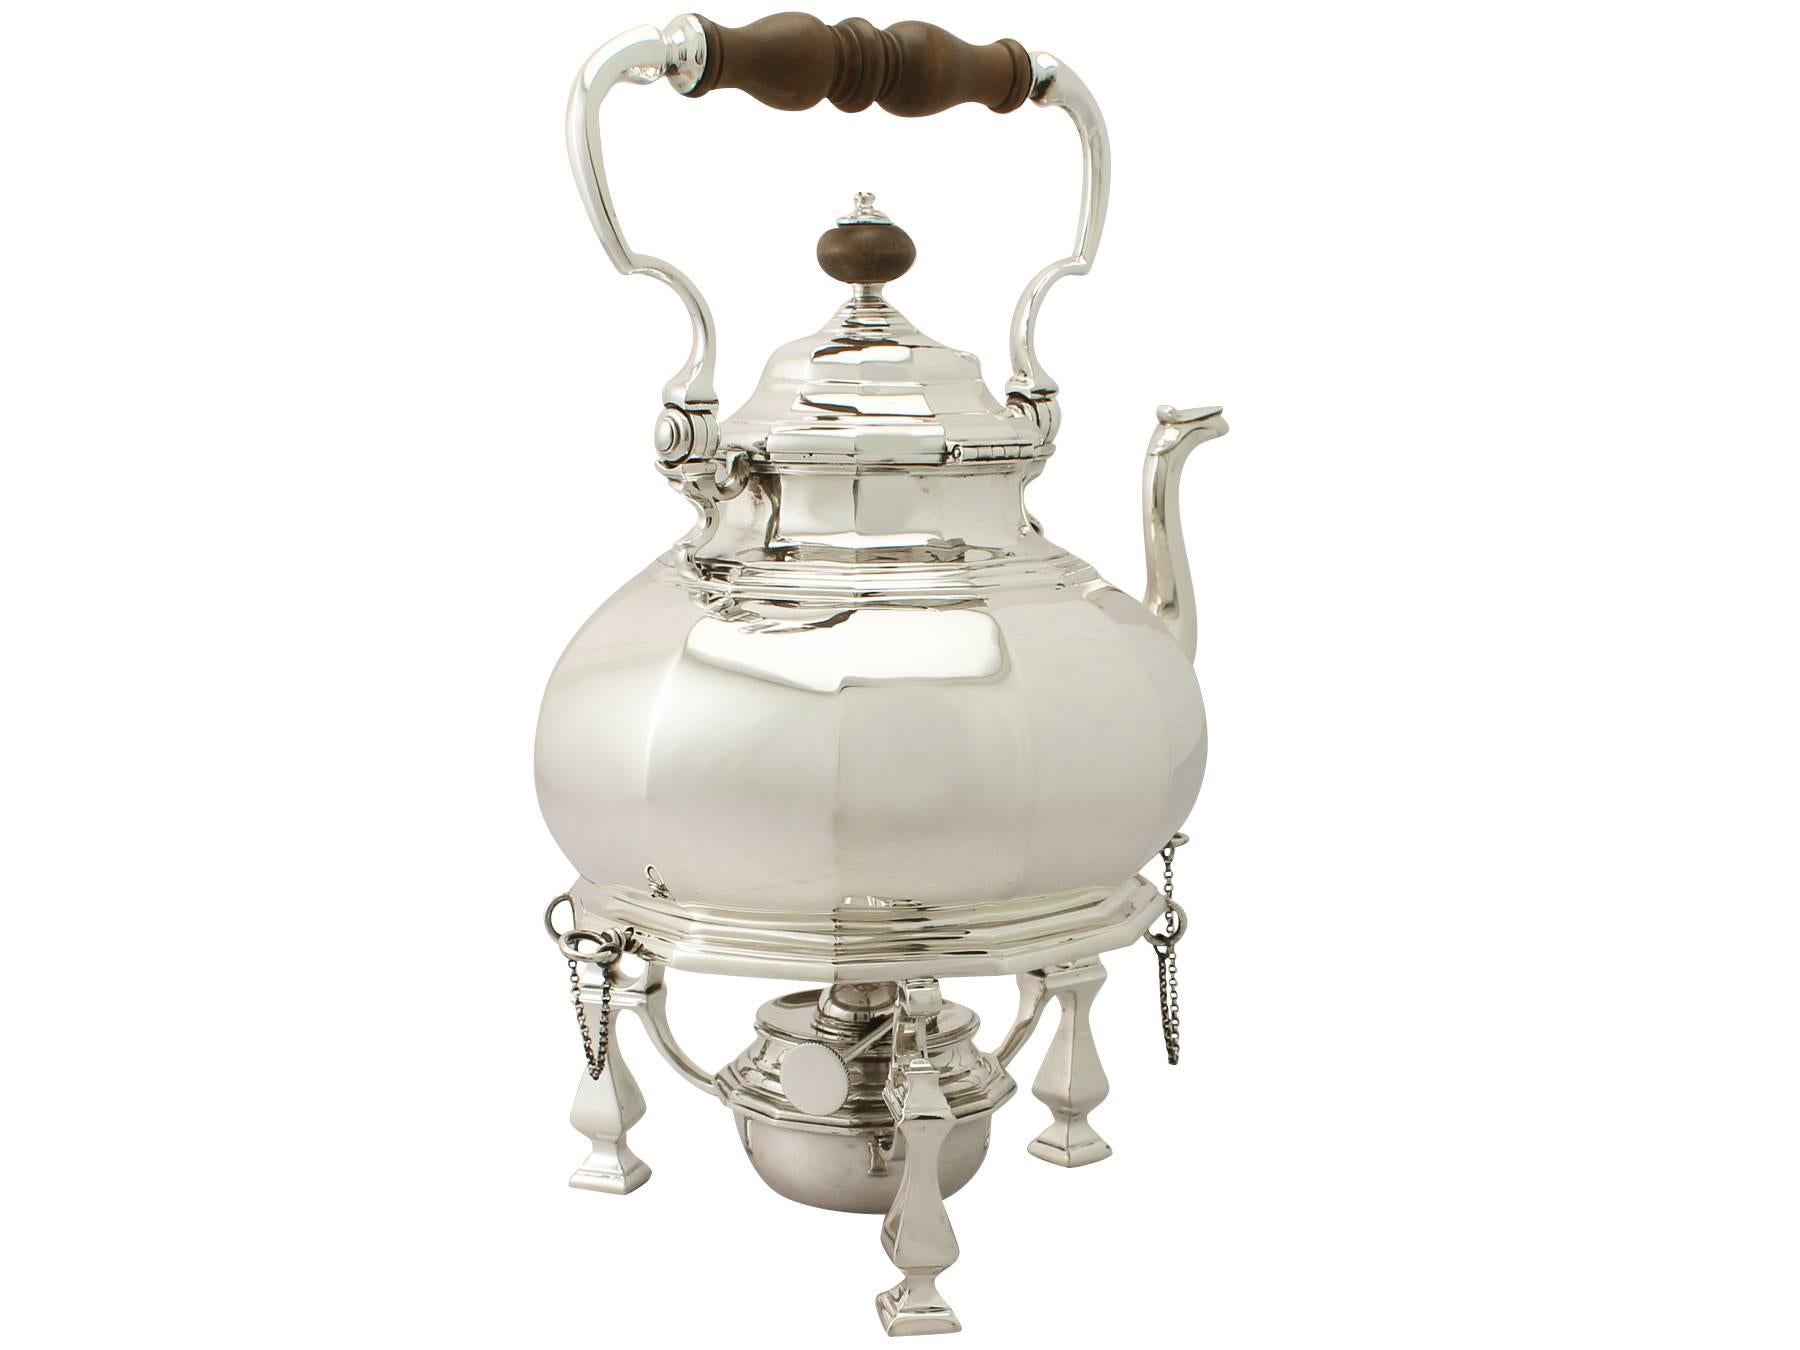 A magnificent, fine and impressive, large antique George V English sterling silver spirit kettle in the Queen Anne style; an addition to our antique silver teaware collection

This magnificent antique George V sterling silver spirit kettle has a